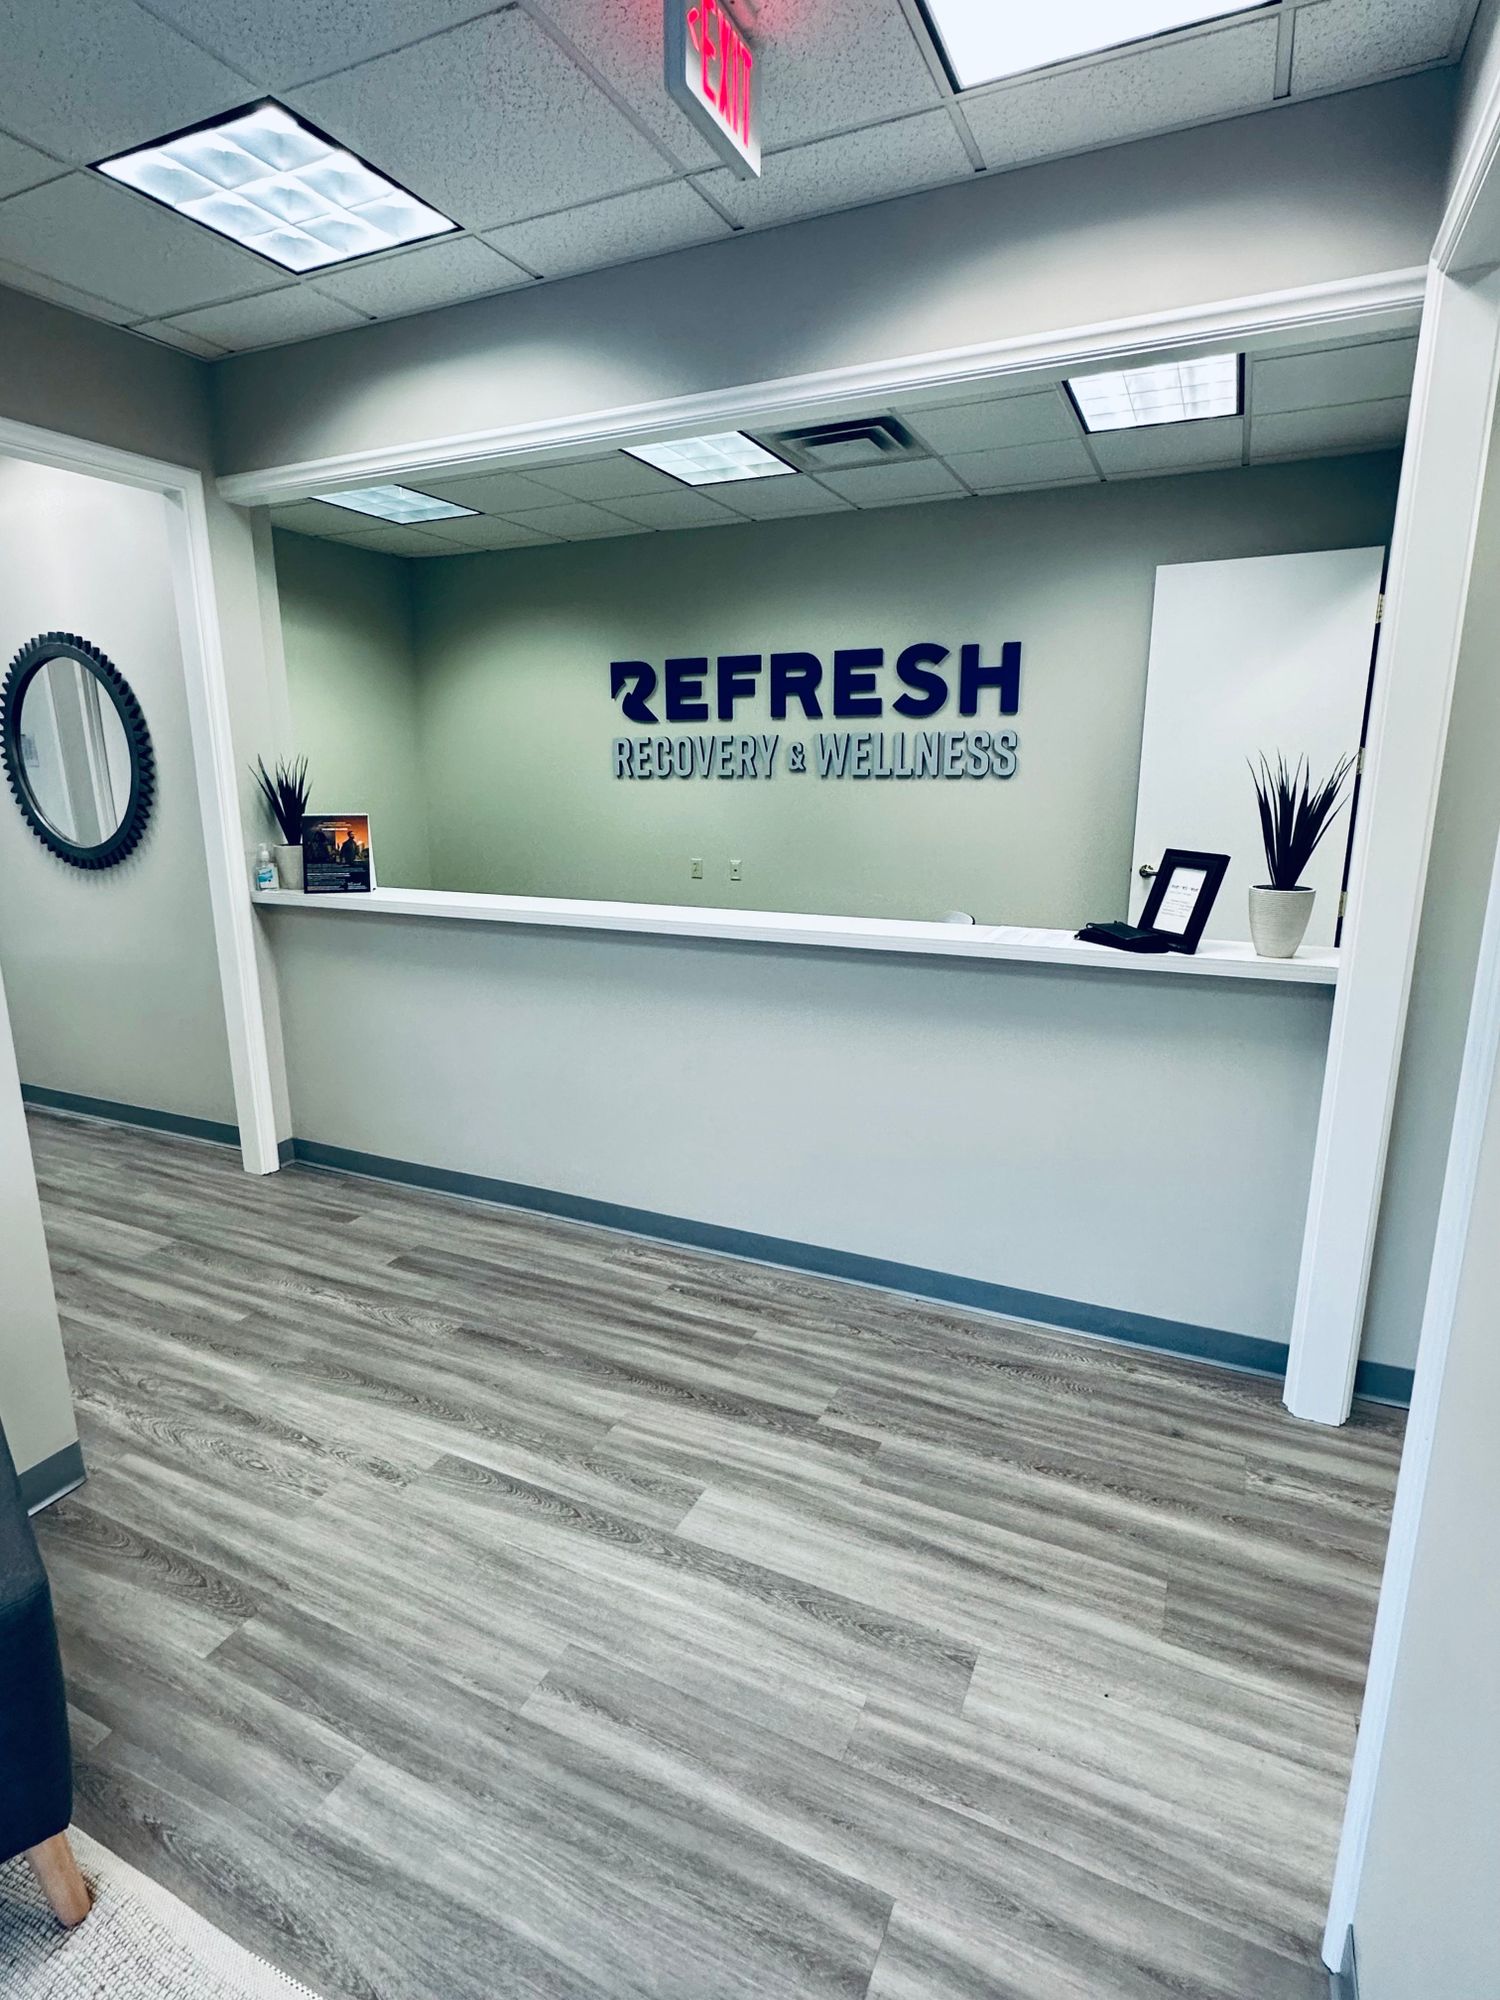 Refresh Recovery & Wellness, Treatment Center, Norwell, MA, 02061